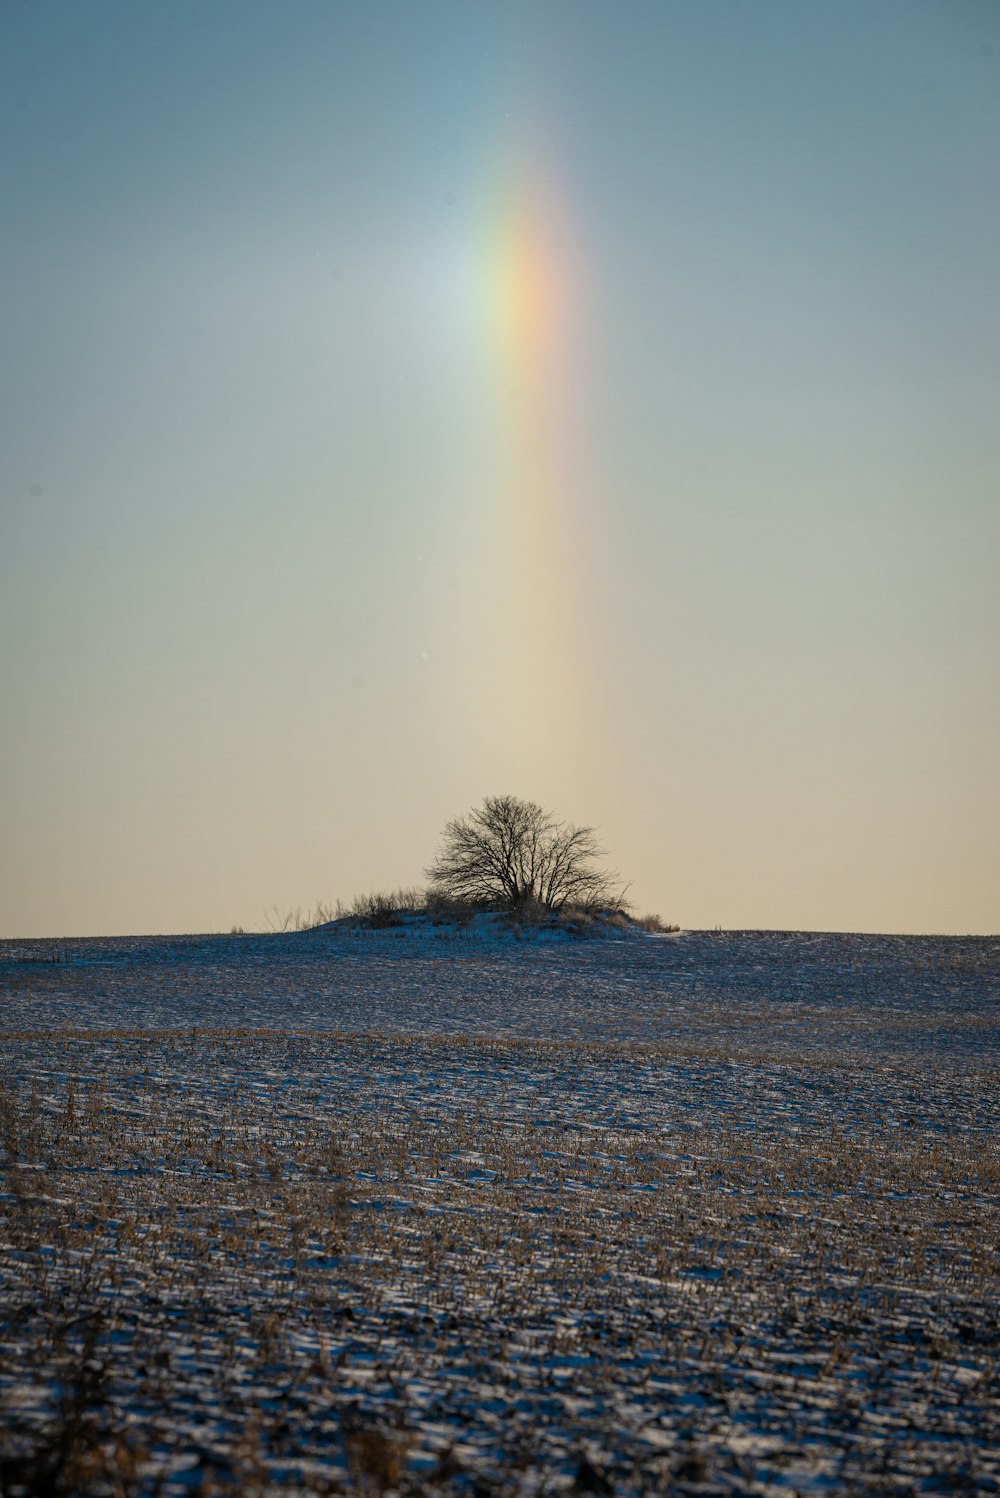 a single tree in a field with a rainbow in the sky